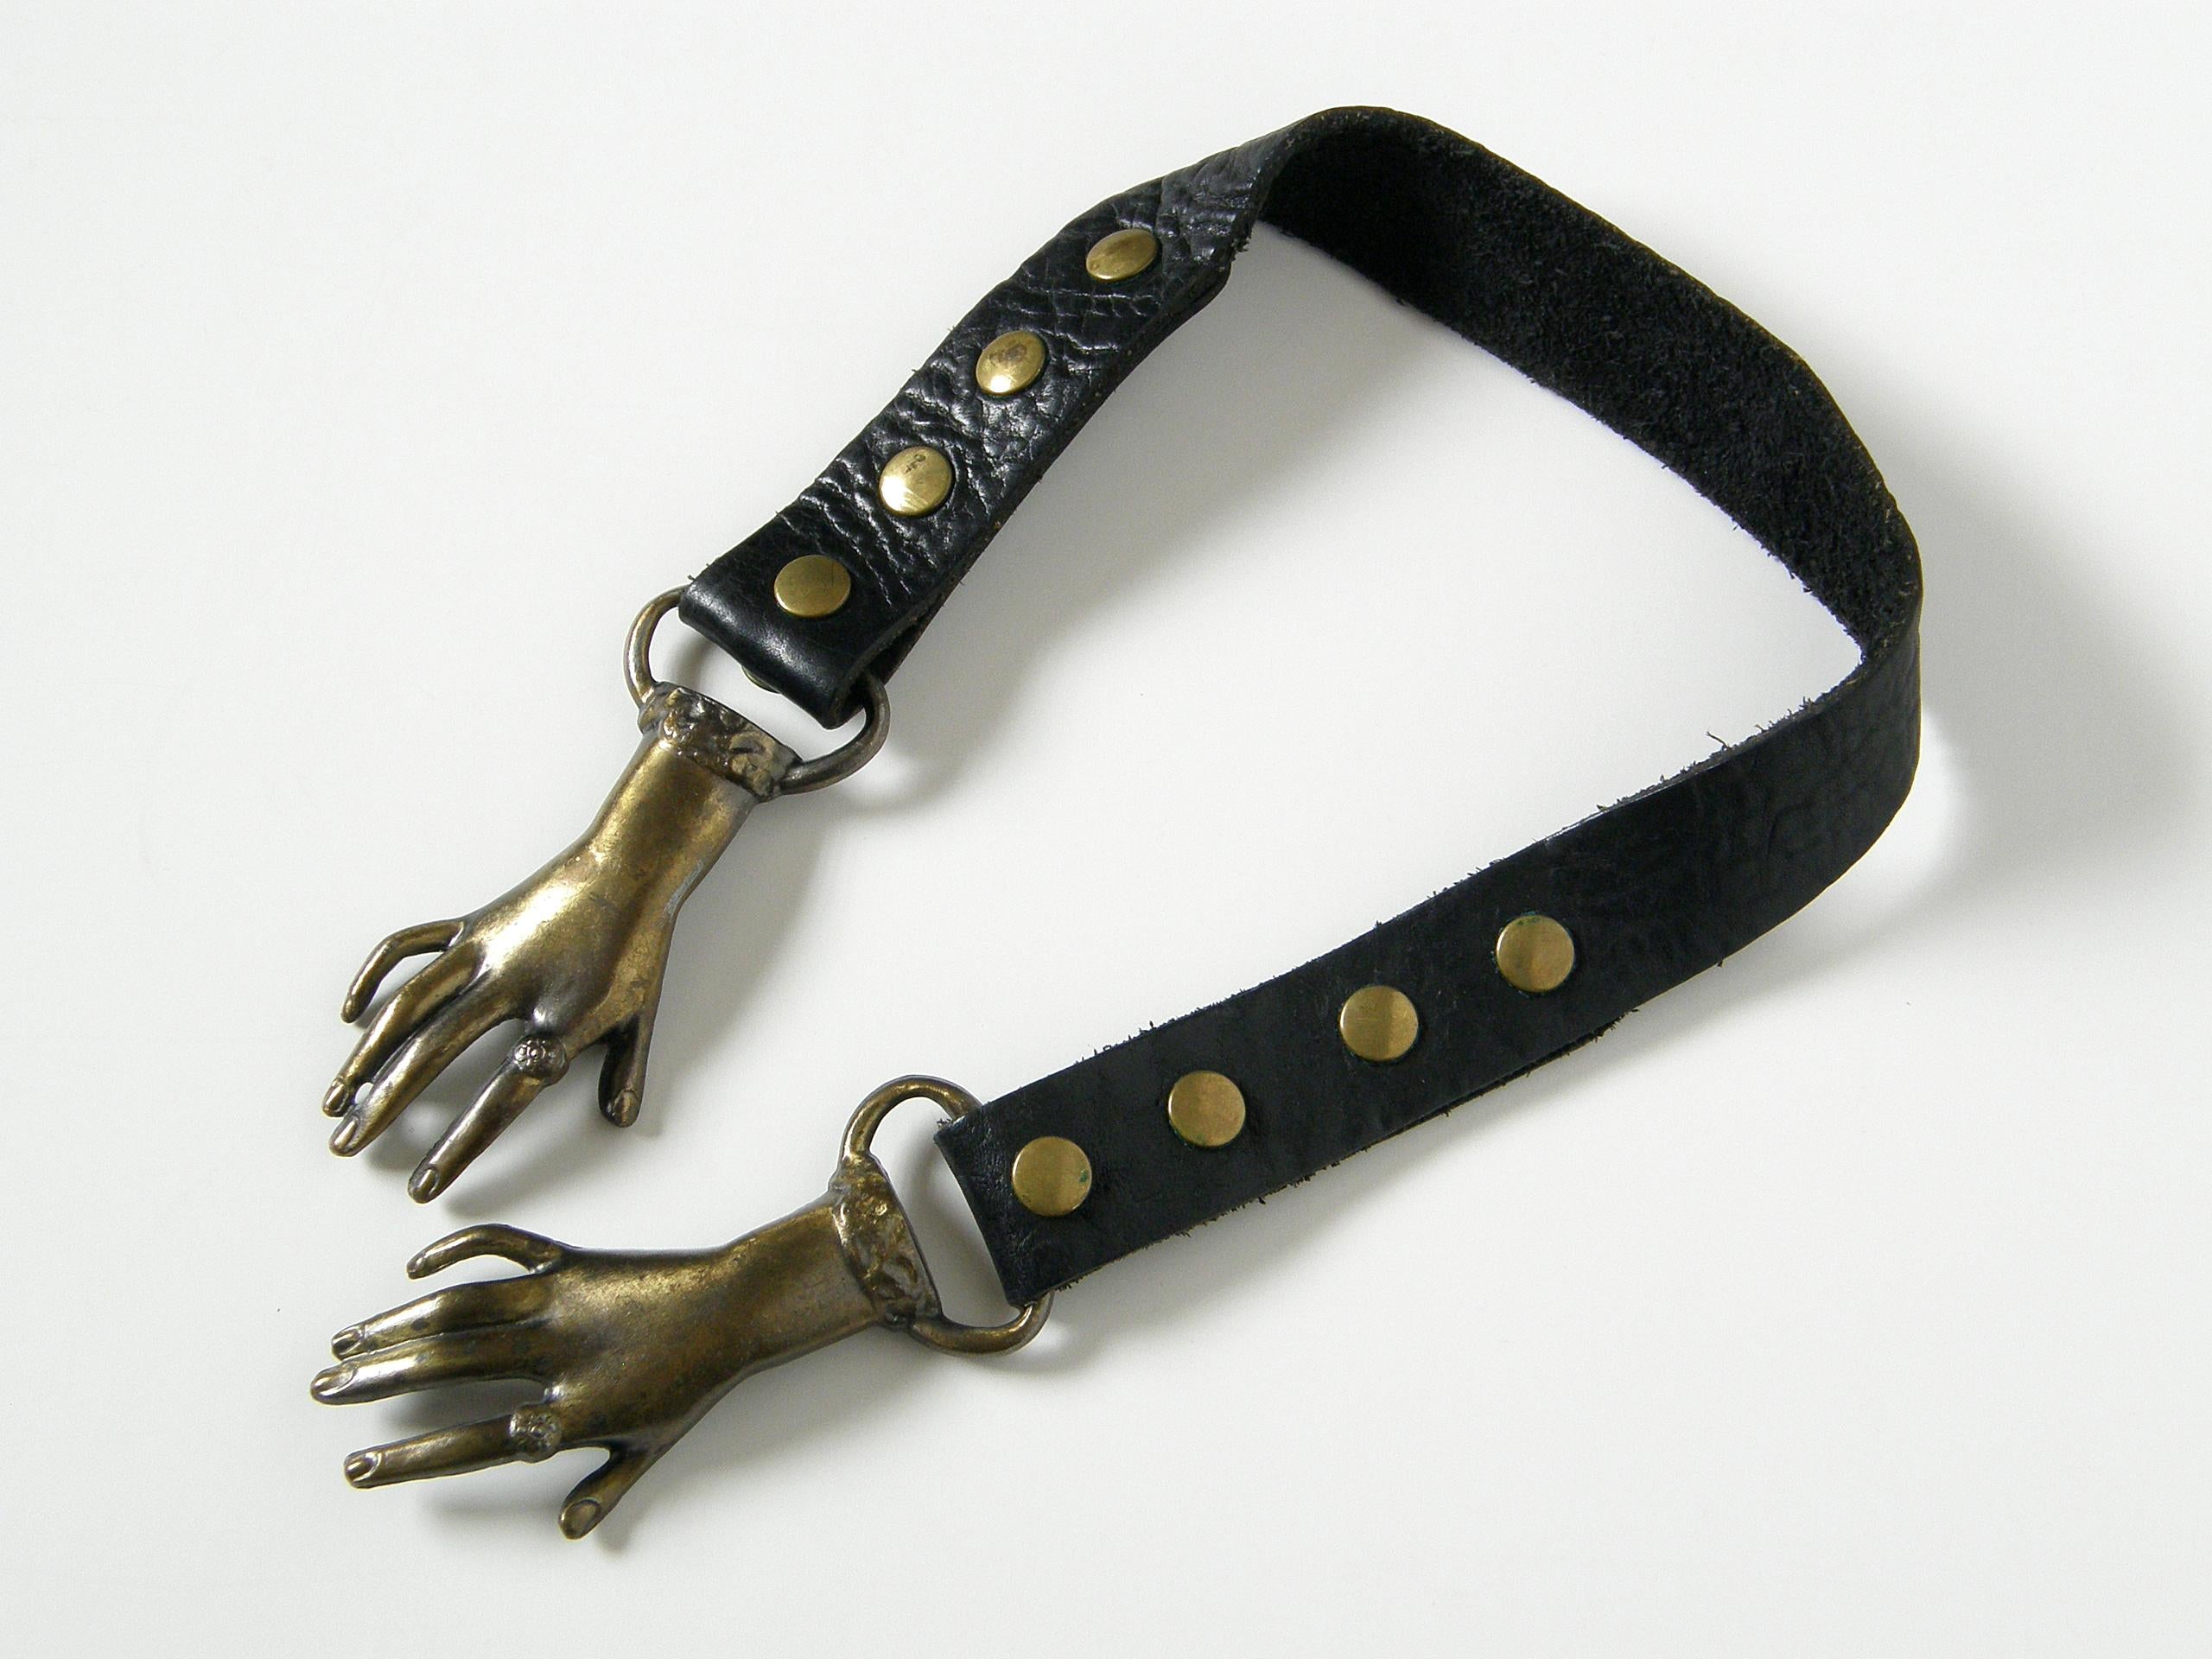 This adjustable, black leather belt has a charming buckle of two overlapping hands that are not quite clasped. They wear rings and bracelets (or perhaps fancy cuff details) and have a romantic, Victorian style with an 